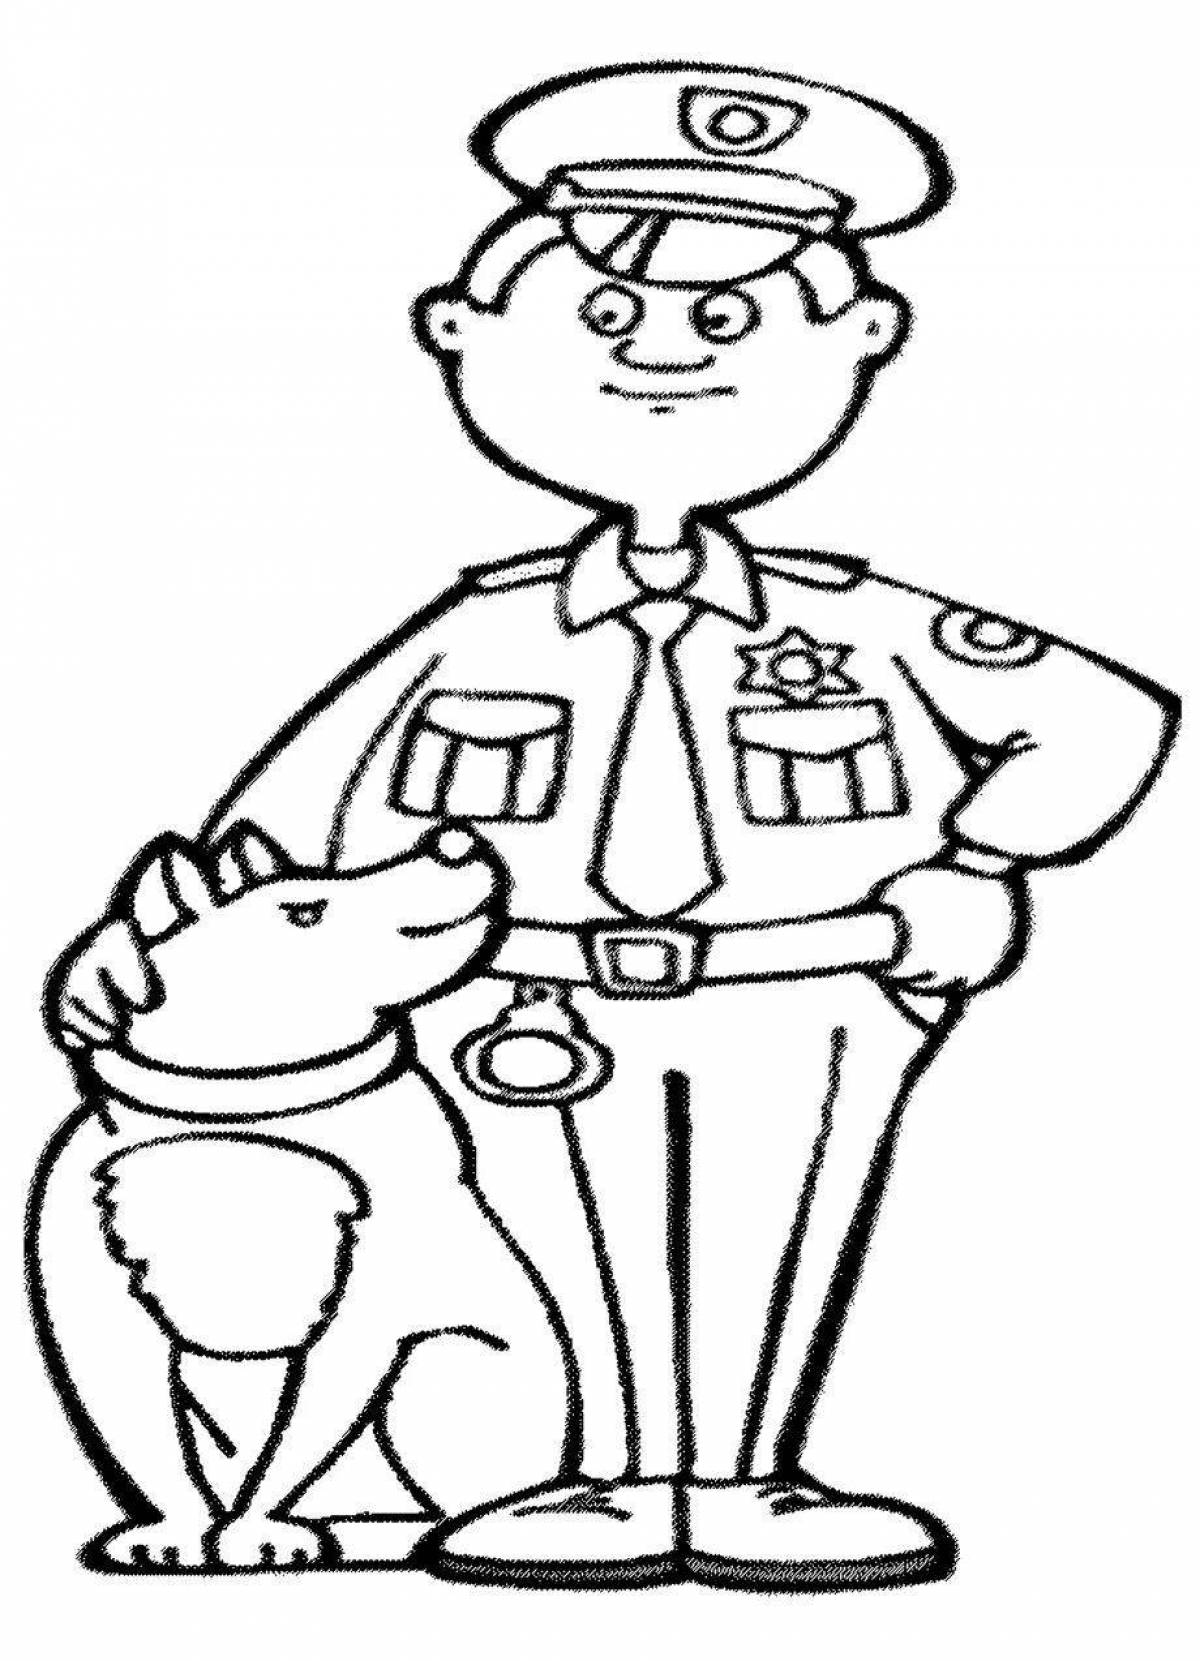 Bold coloring police figure